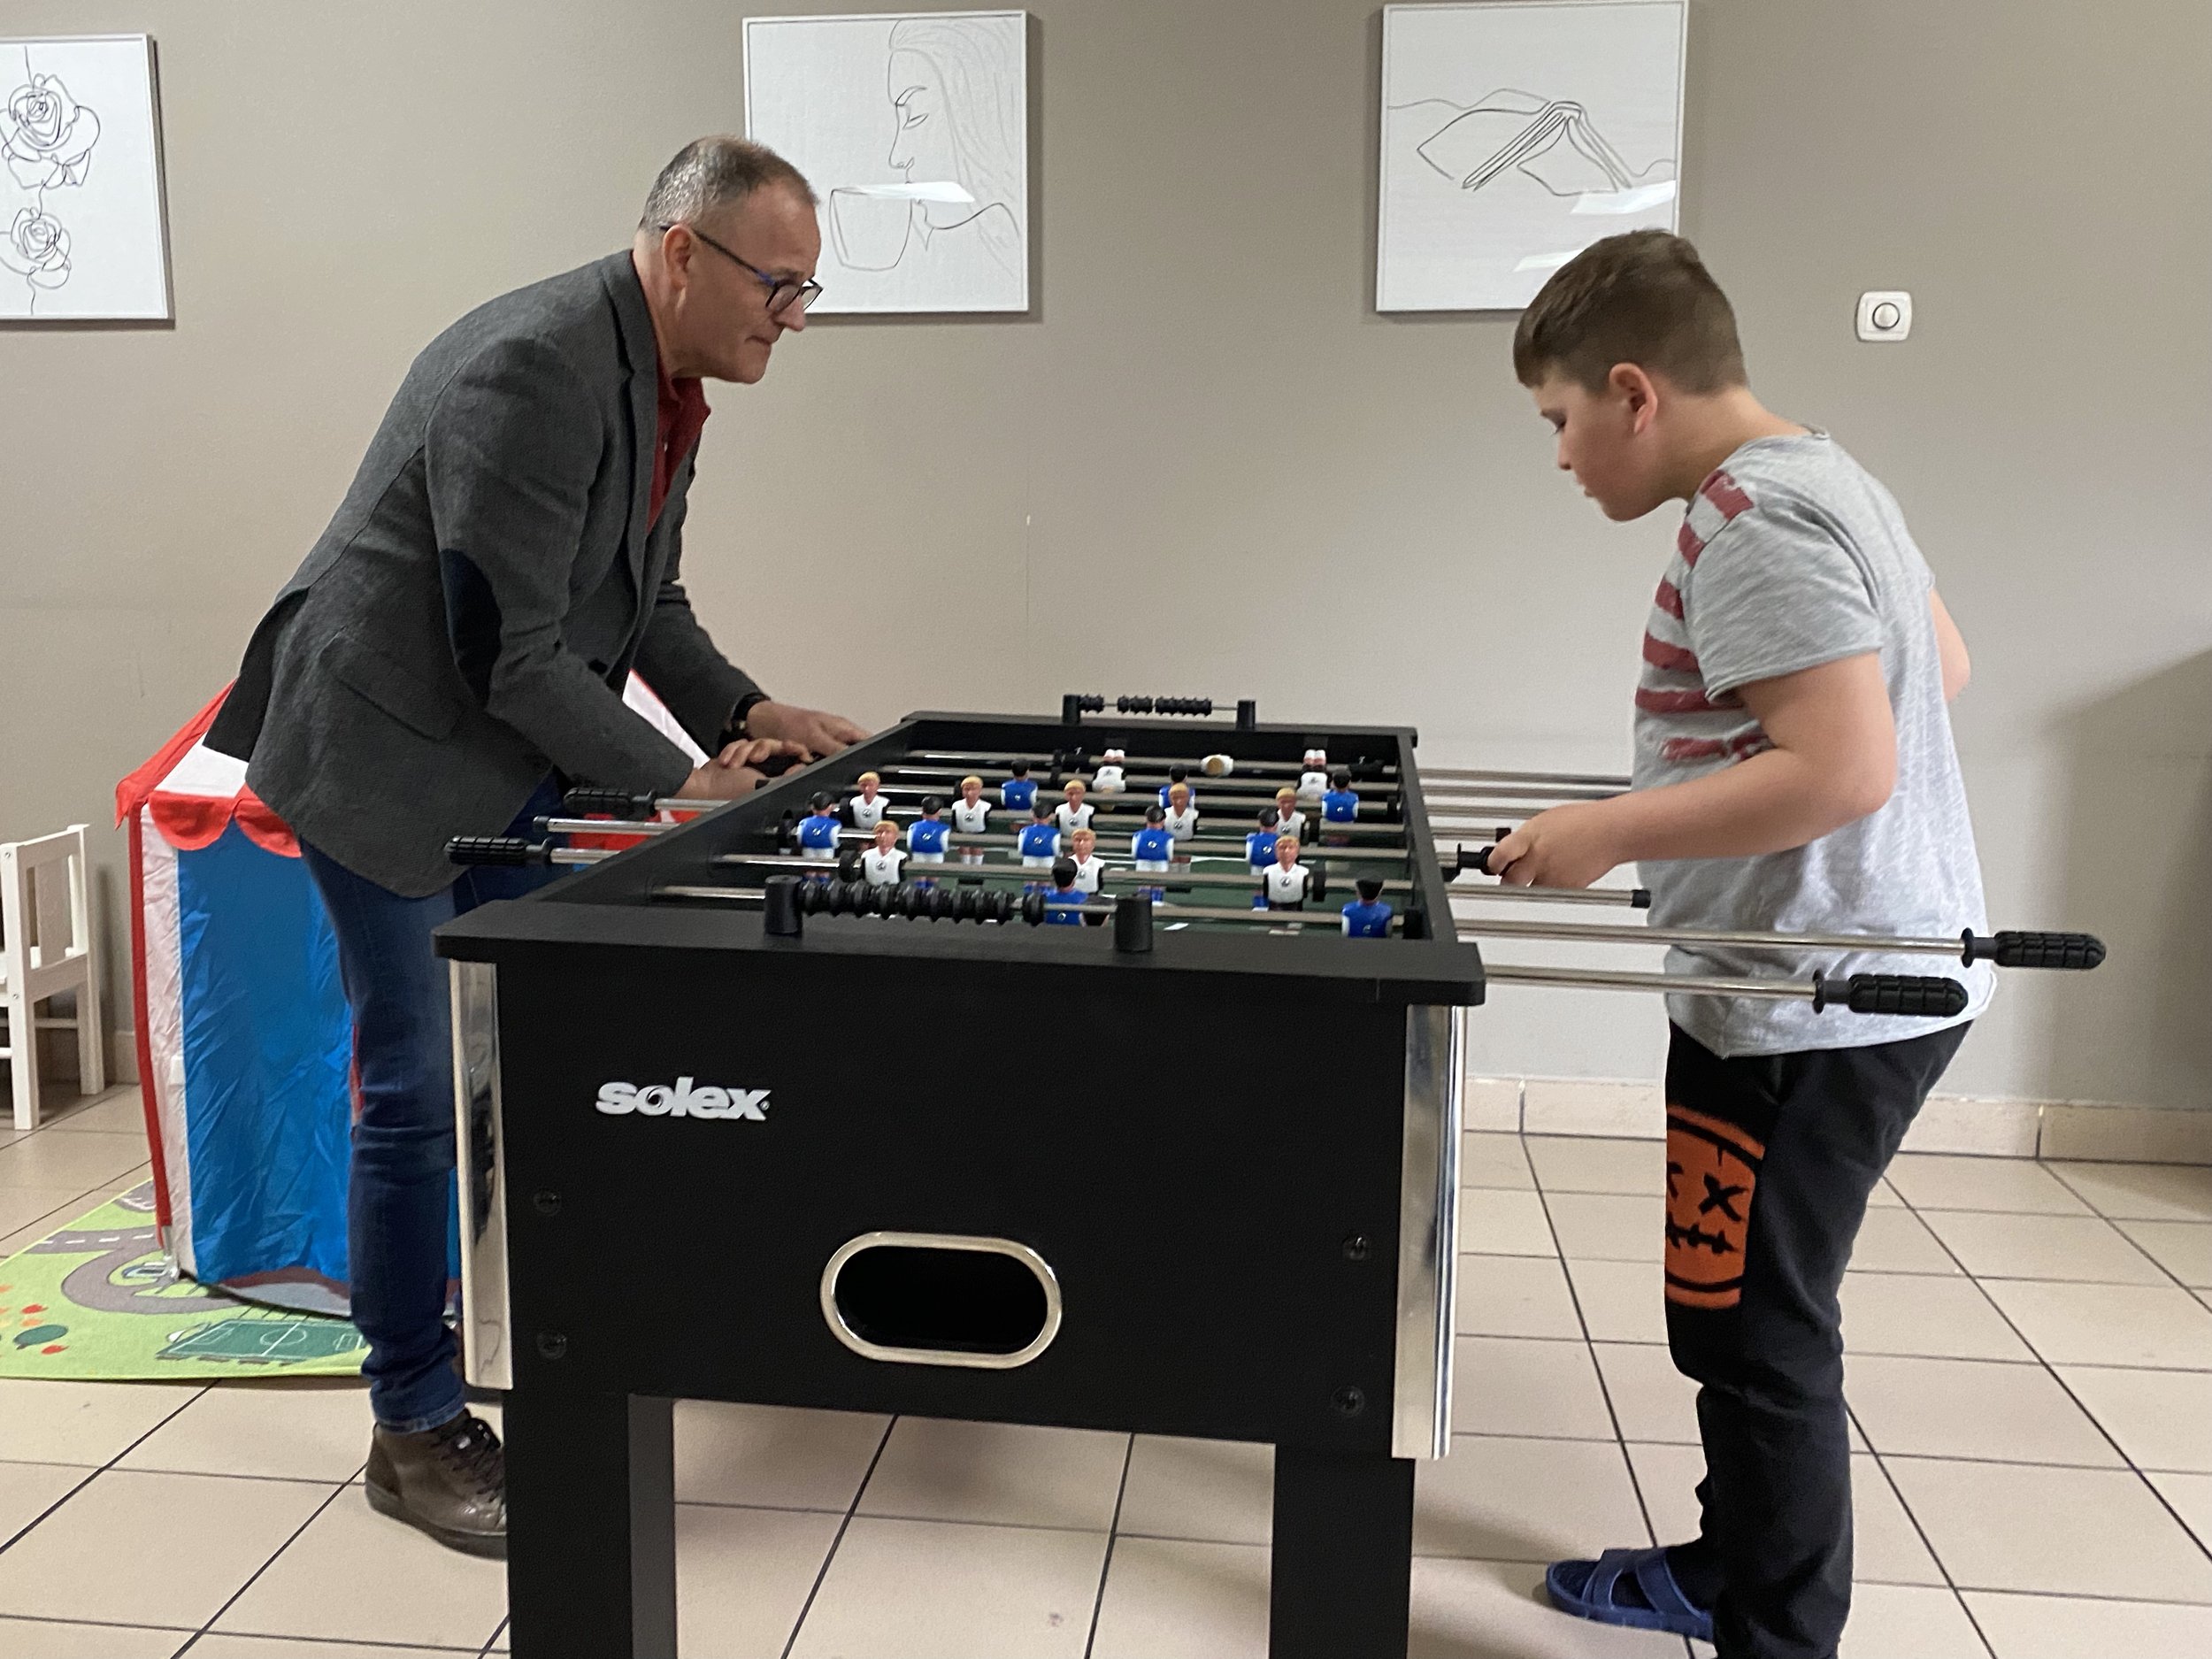 Piotr Nowak playing table soccer with one of the Ukrainian children